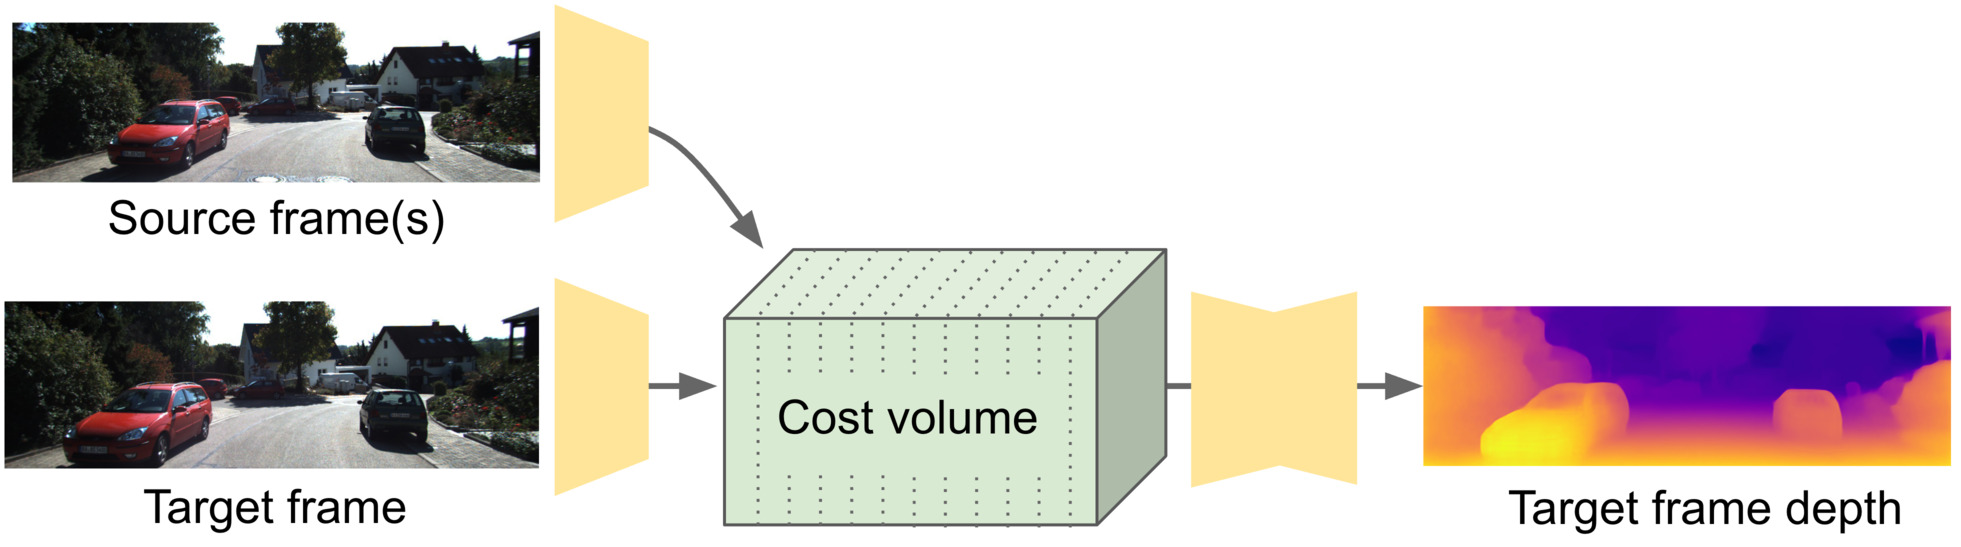 Cost volume used for aggreagting sequences of frames